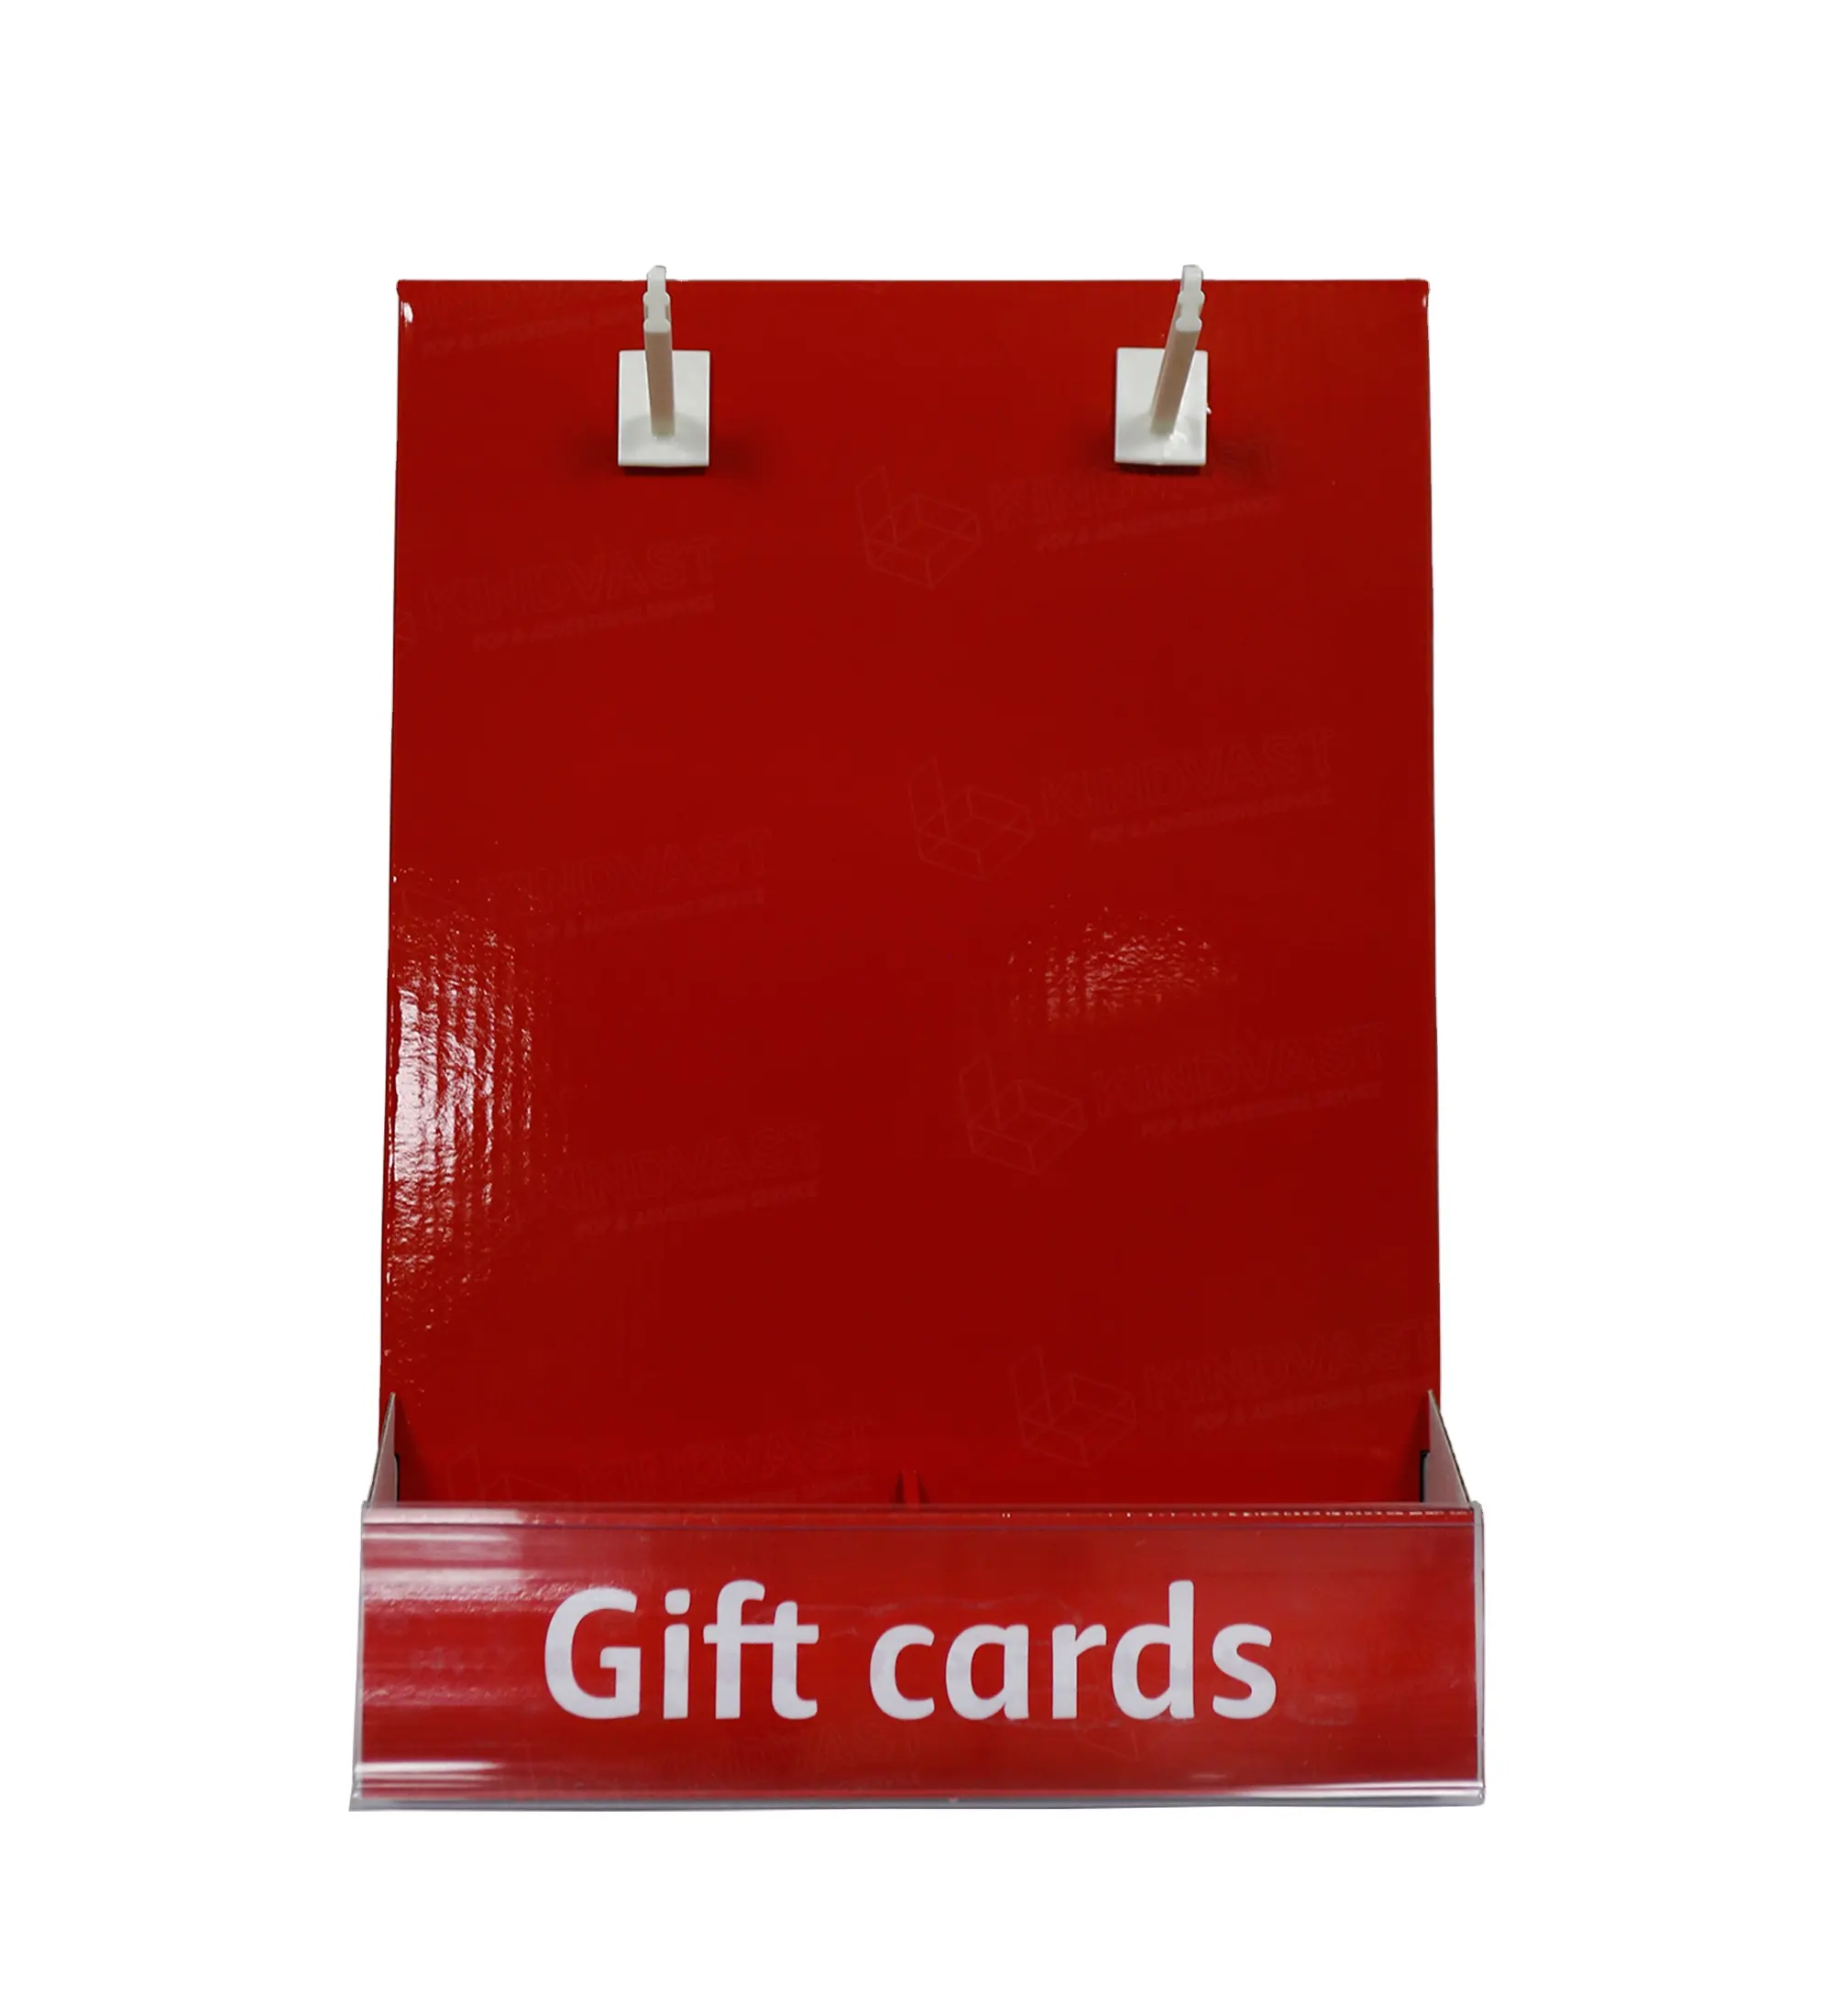 Promotional Paperboard Counter Desktop Display Case for Gift Cards with PVC Price Tag